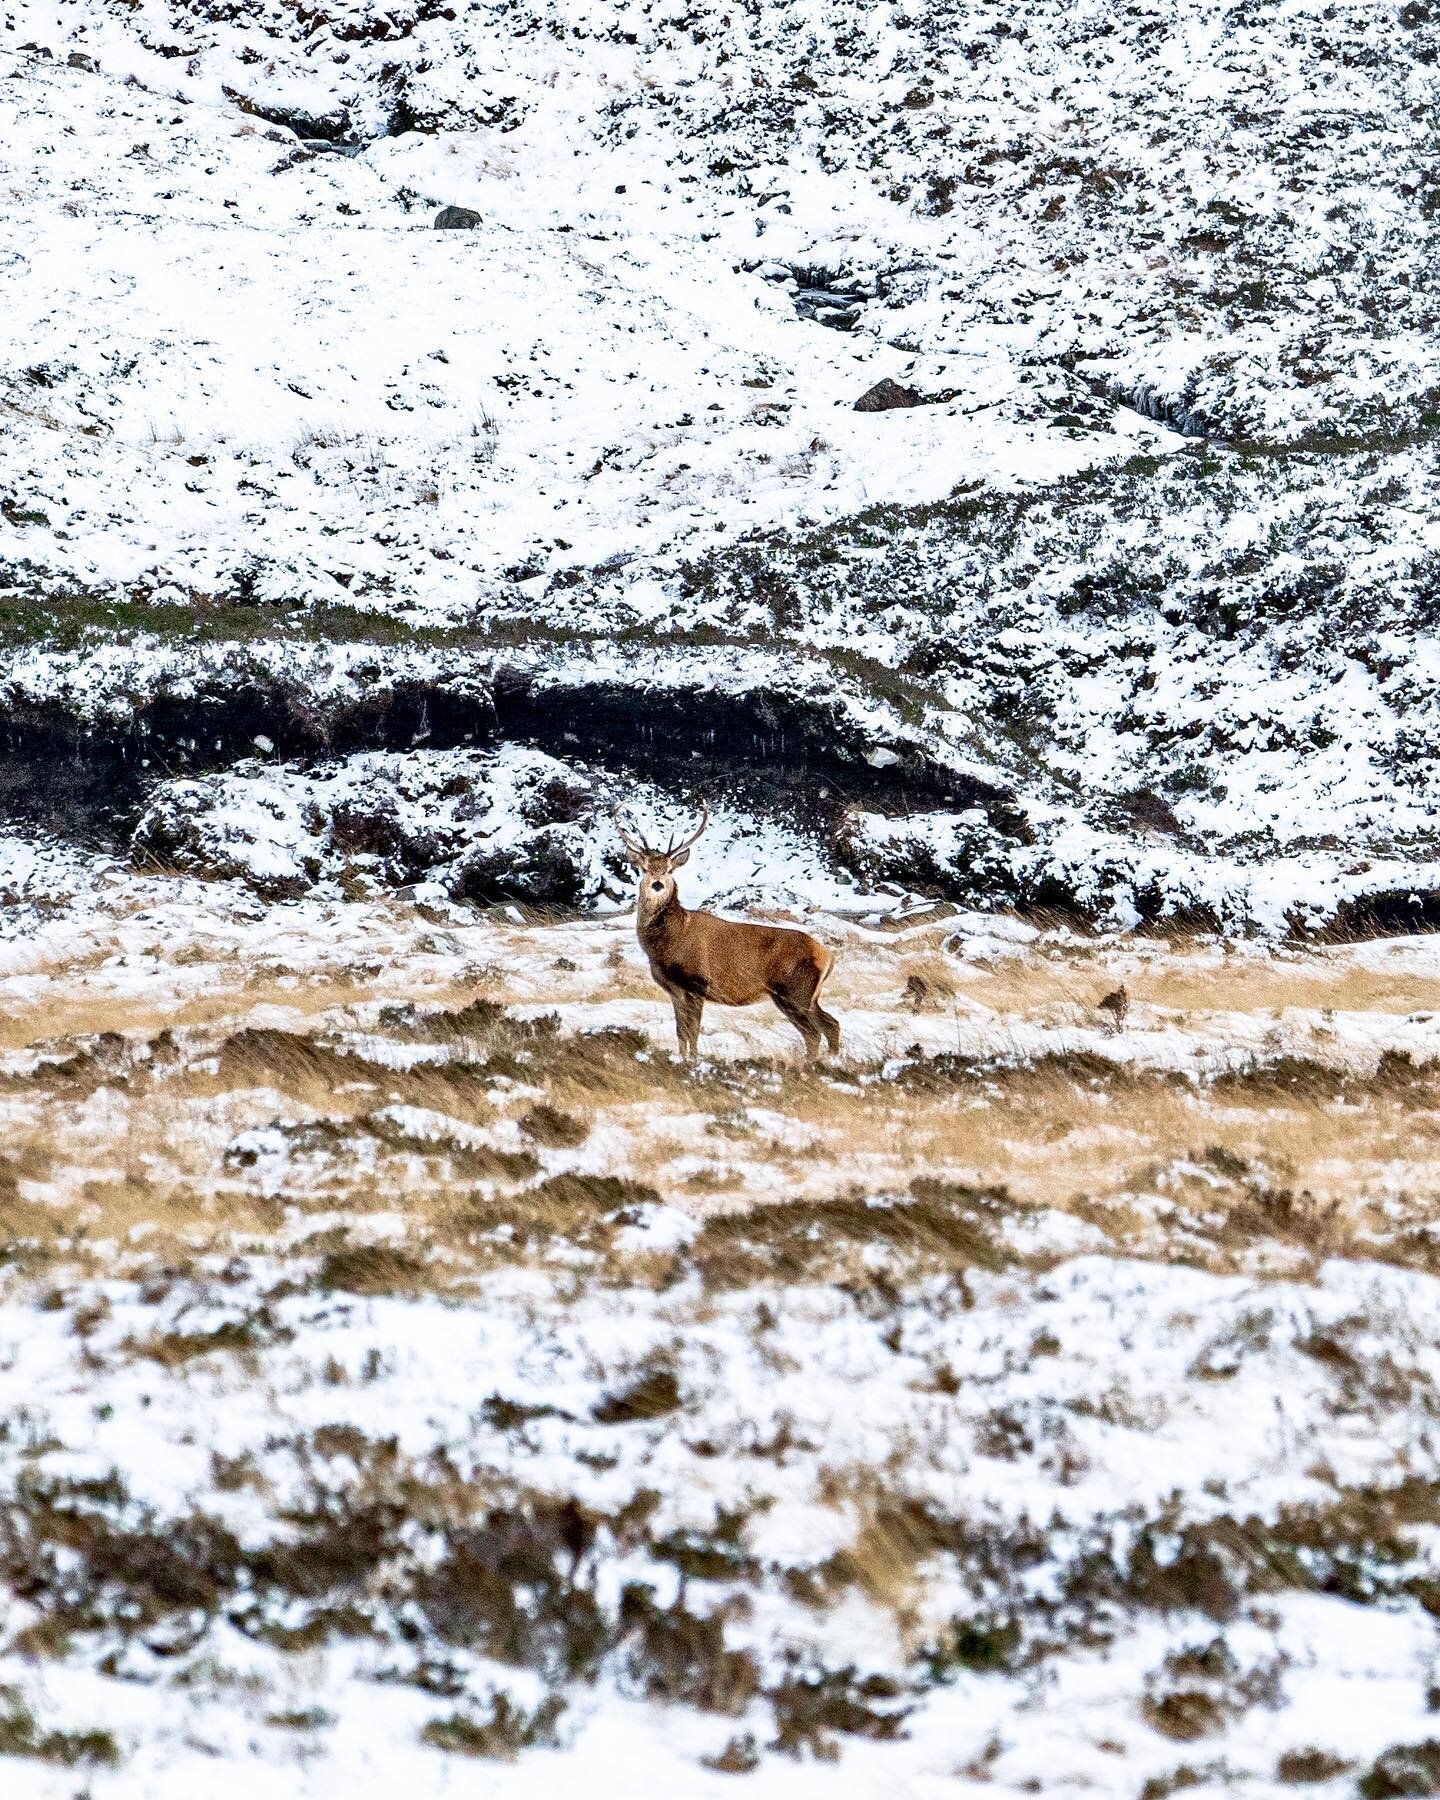 When we first set out on our @northcoast500 travels one of the main animals we hoped to see was a wild stag.. and boy did our wishes come true. 🦌

The trip started as a blustery drive through the Cairngorms making our way to Inverness and beyond, ke